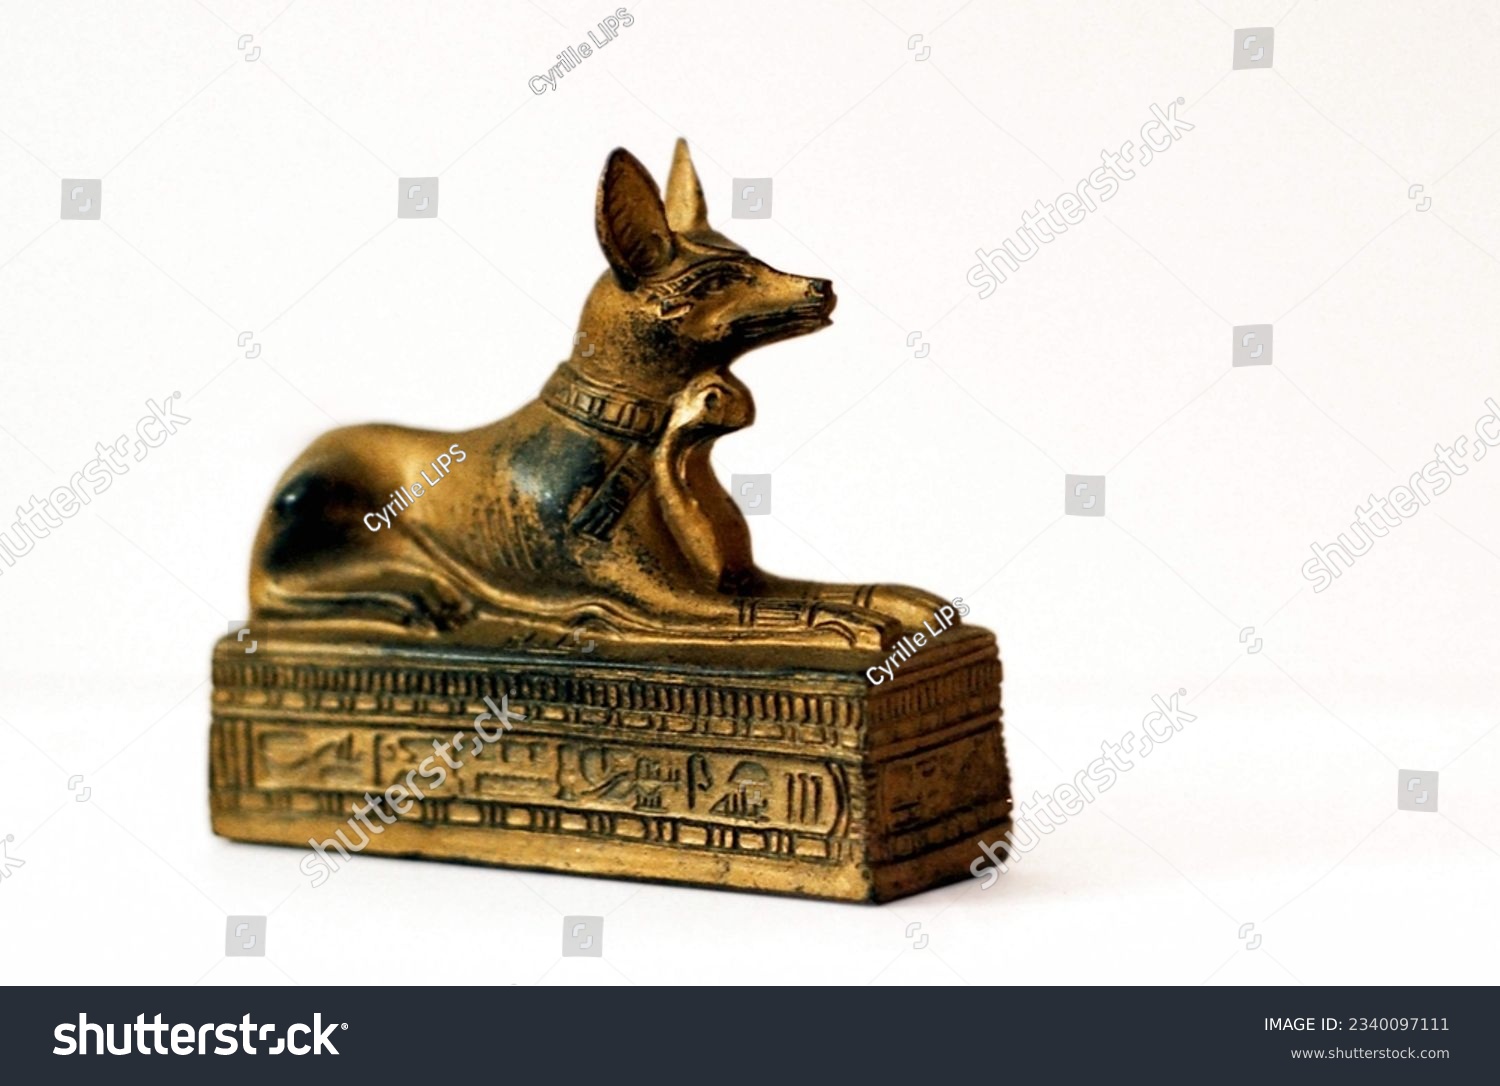 captivating statuette of Anubis, the ancient Egyptian god of the afterlife, depicted as a jackal on a white background #2340097111